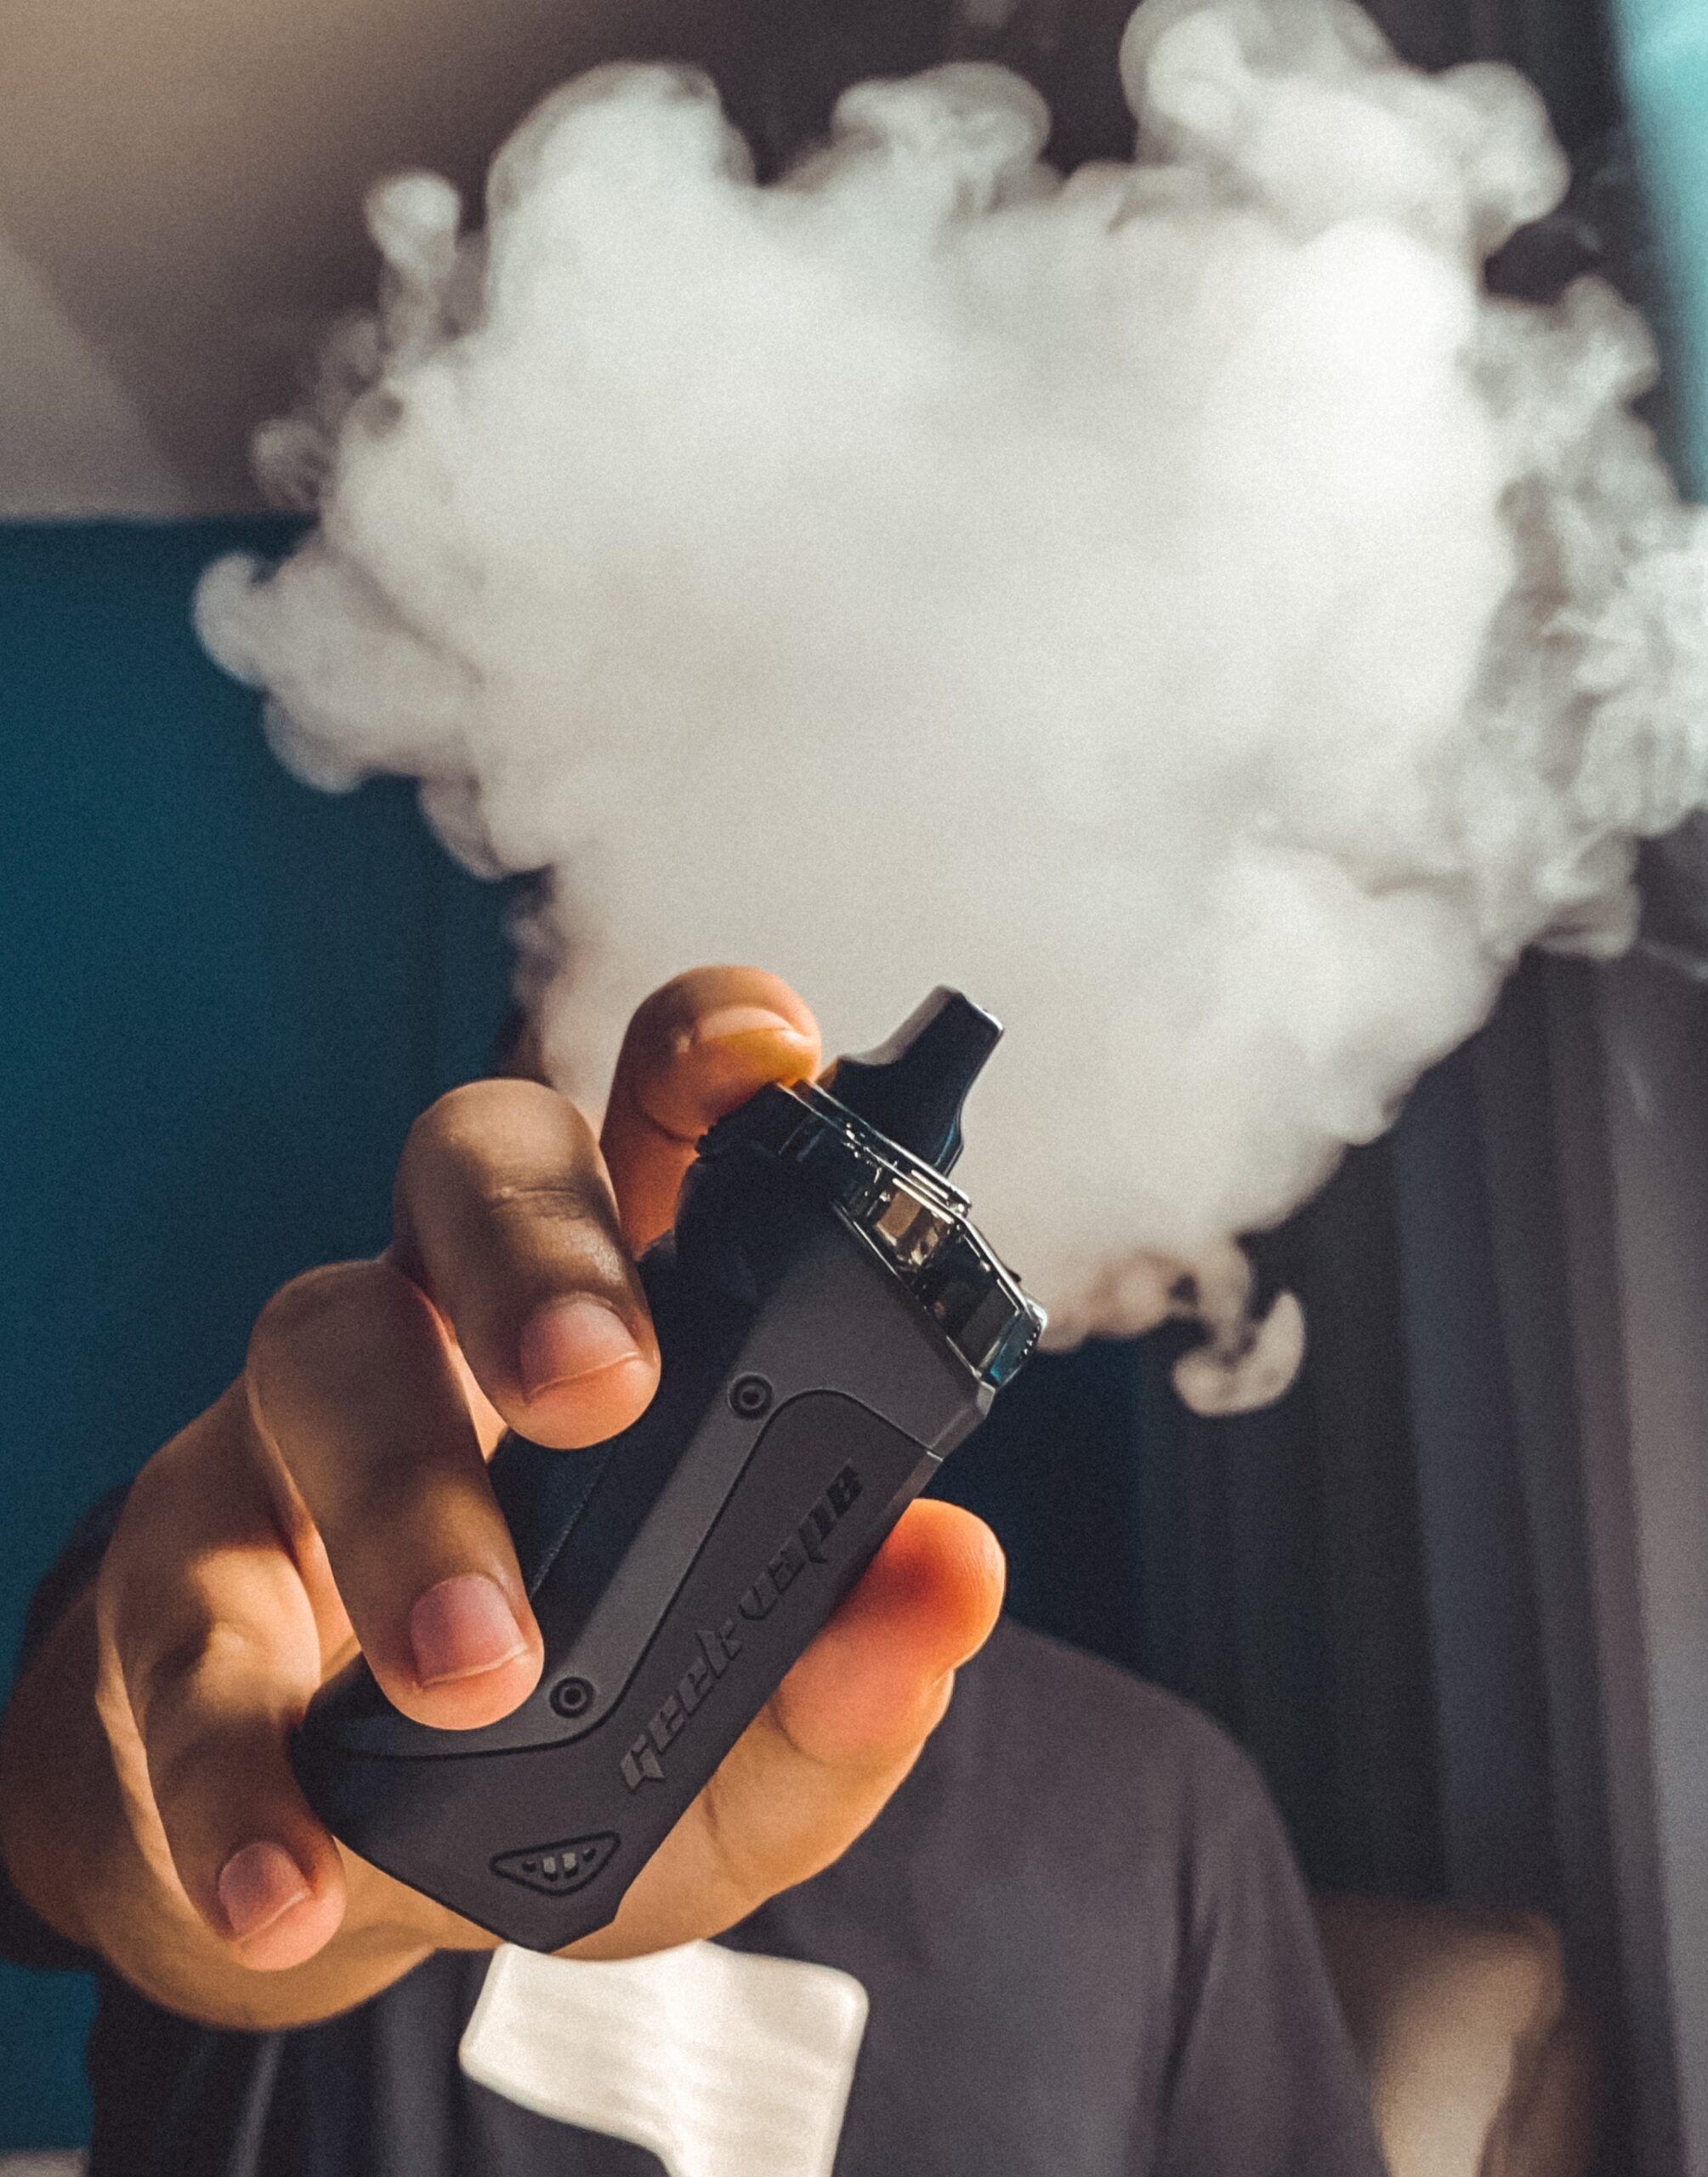 Vaping 101: A Beginner’s Guide to Vaping and How to Do It